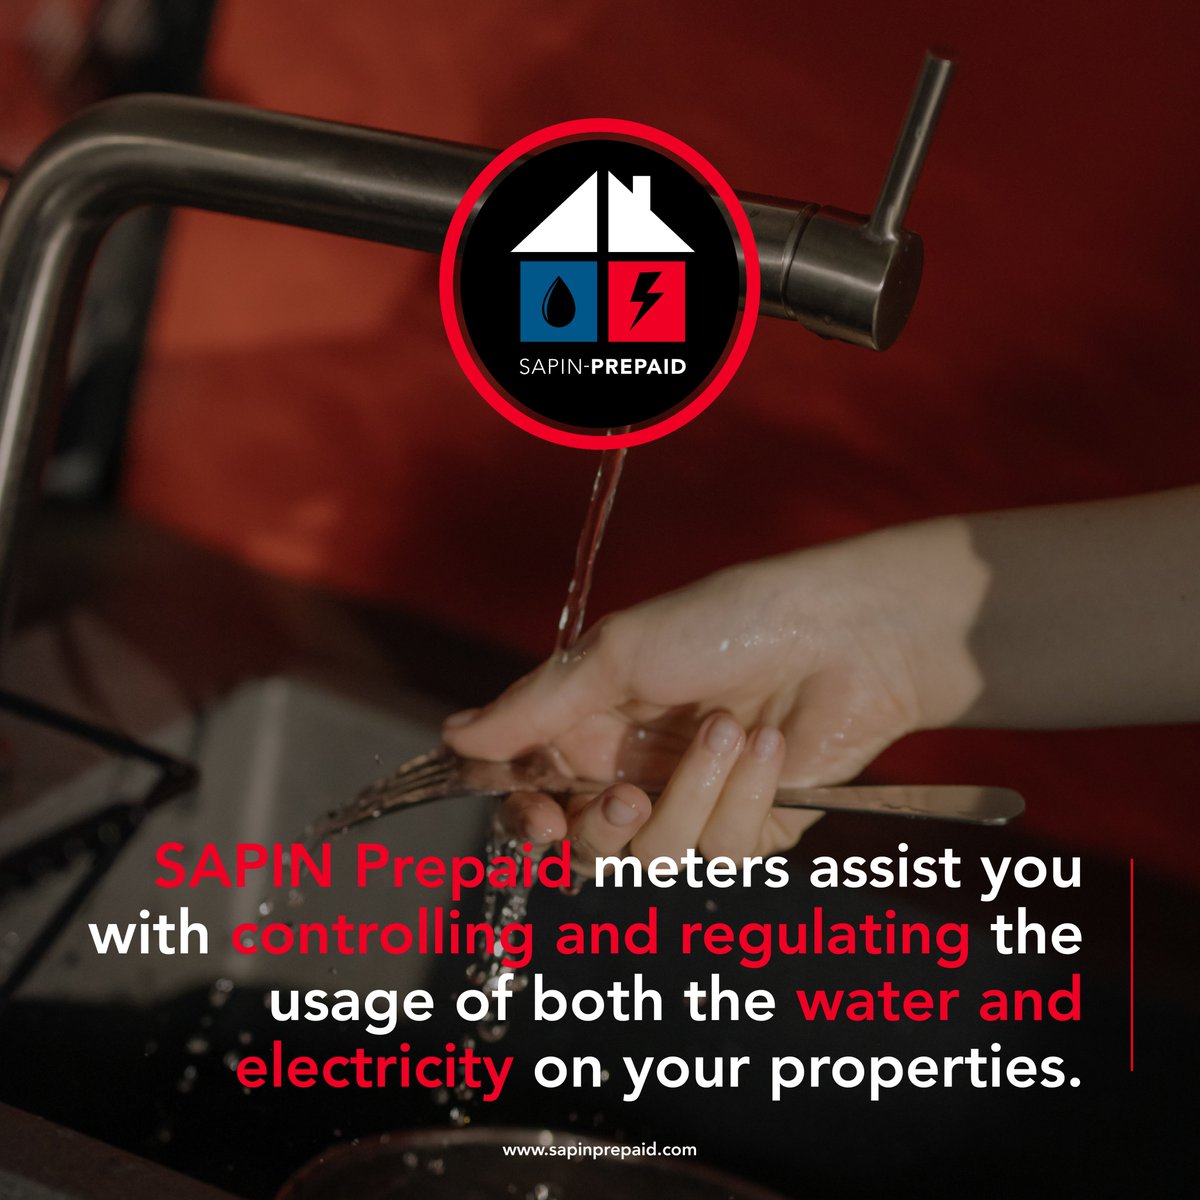 A large benefit to prepaid meters is the awareness both you and your tenants have regarding the usage of water and electricity.

#SAPINPrepaid #sapropertynetwork #SAPIN